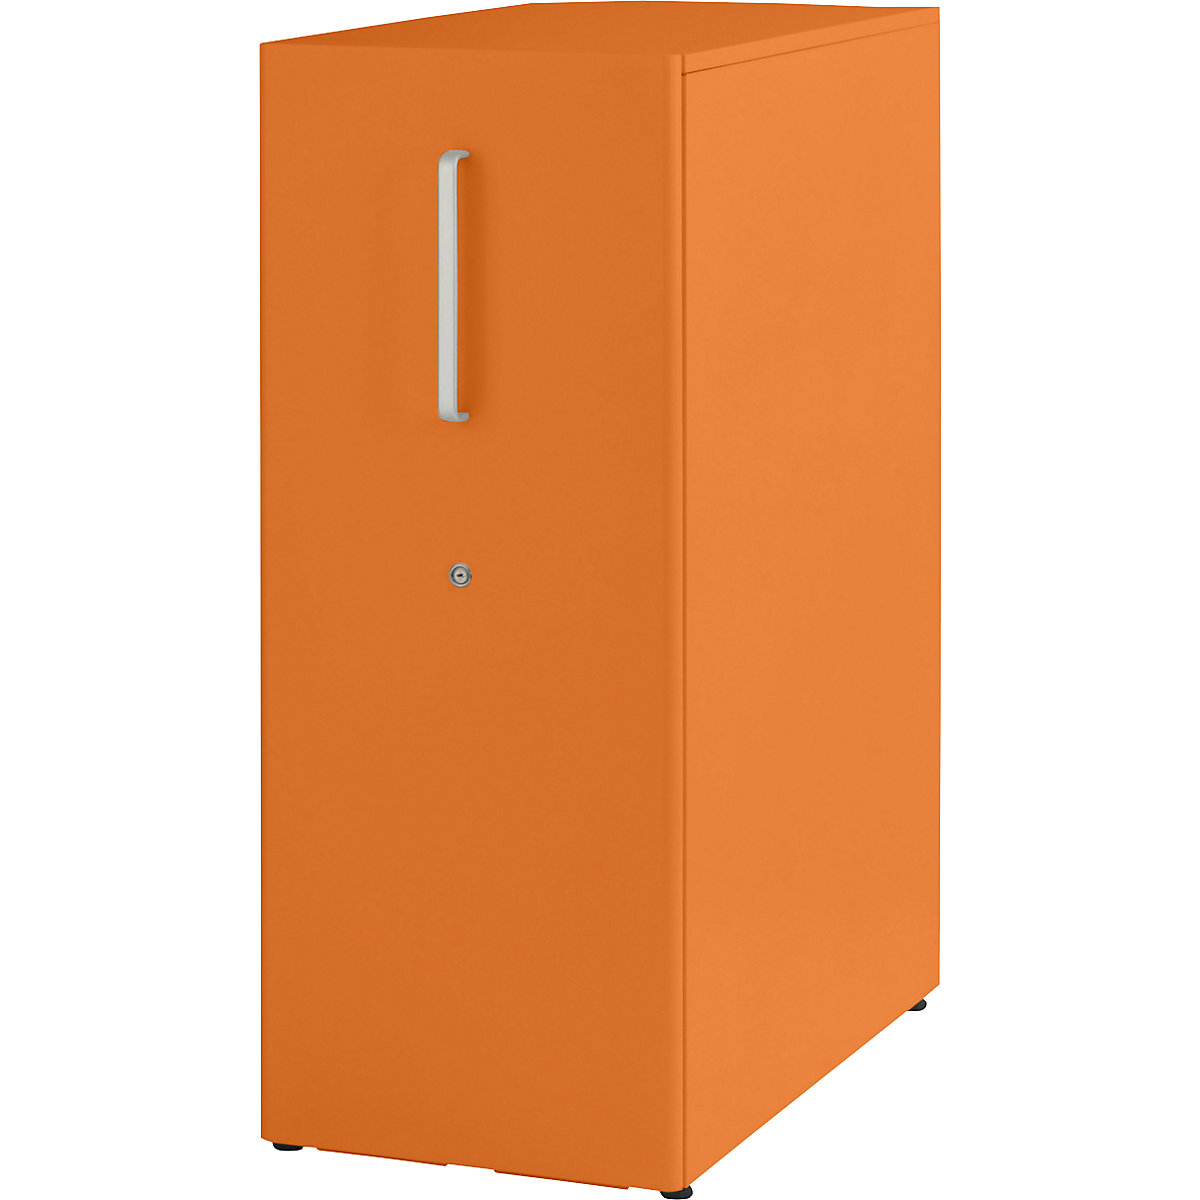 Tower™ 3 add-on furniture, with worktop – BISLEY, for the right side, 2 shelves, orange-20